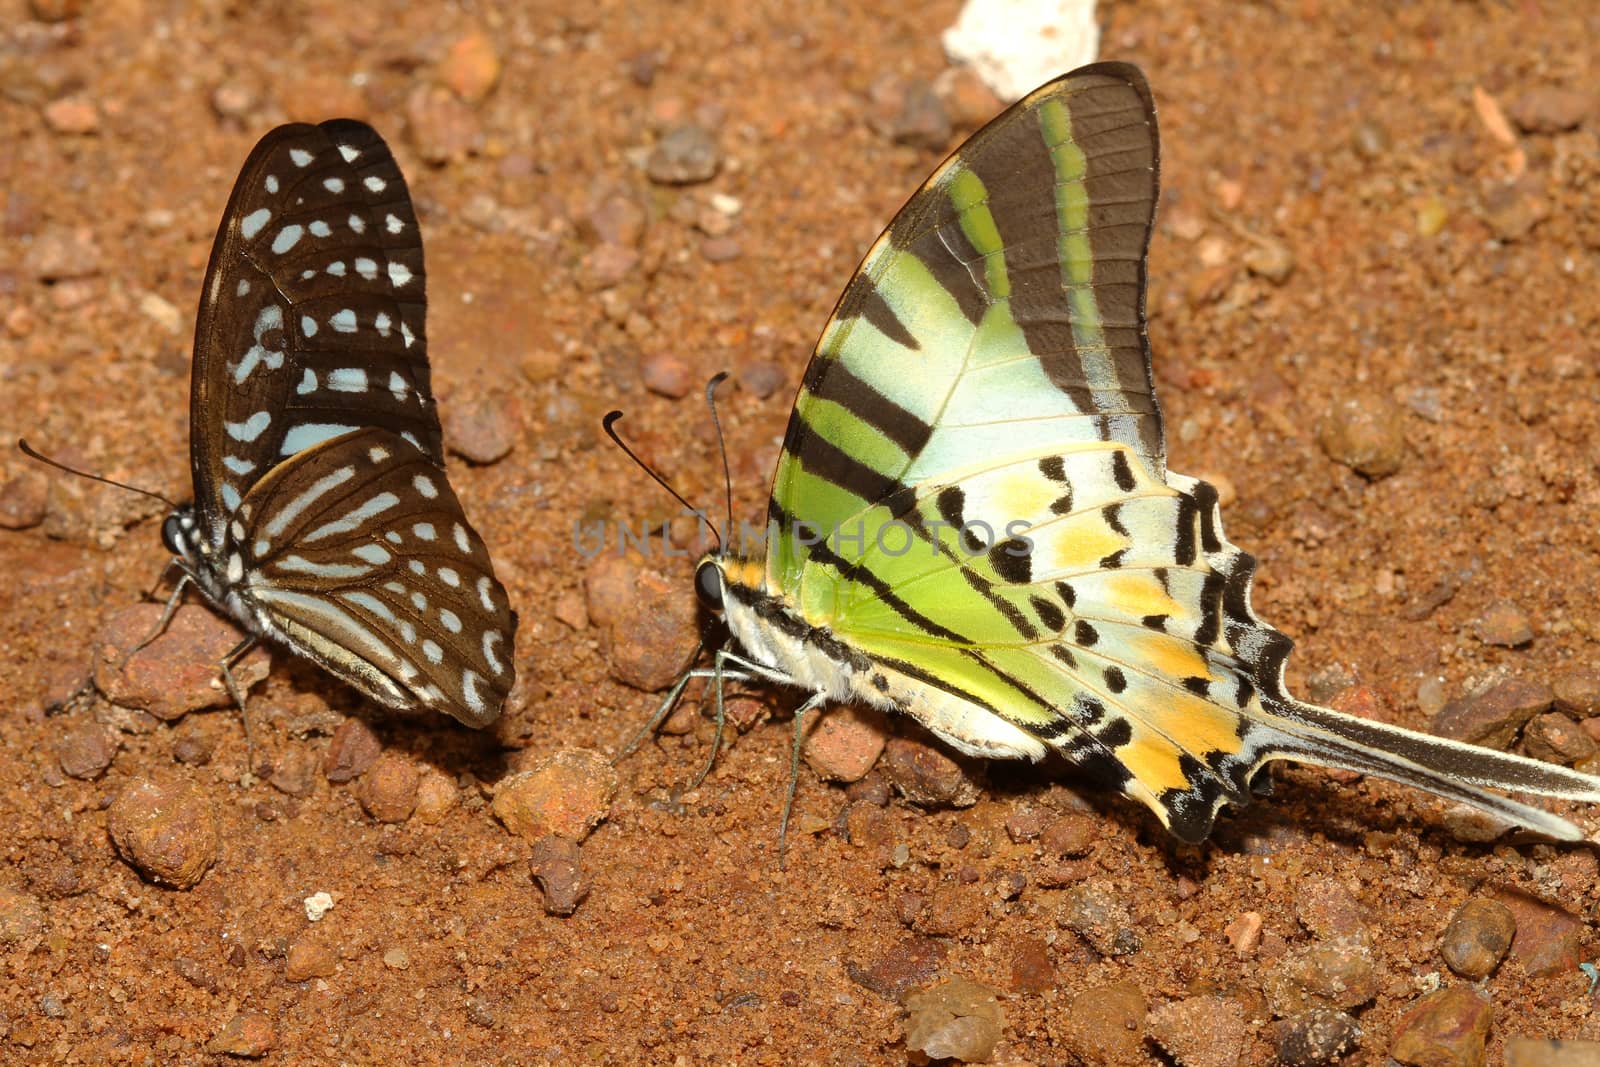 two butterfly on ground in forest thailand